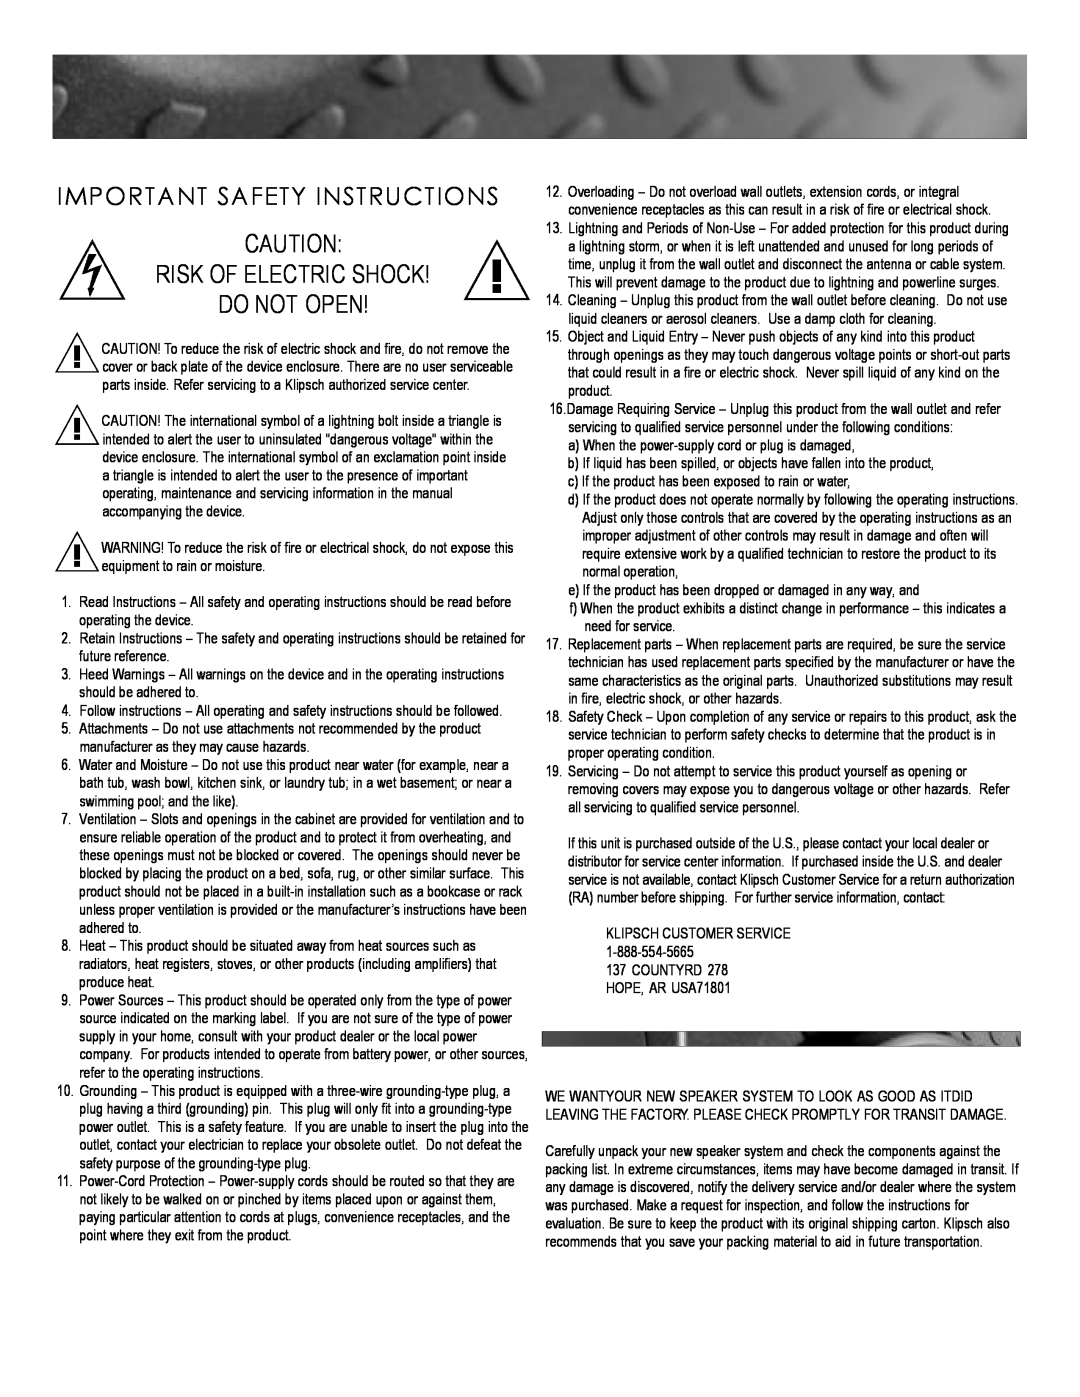 Kitchen Labs ProMediaTM manual Important Safety Instructions, Risk Of Electric Shock Do Not Open 